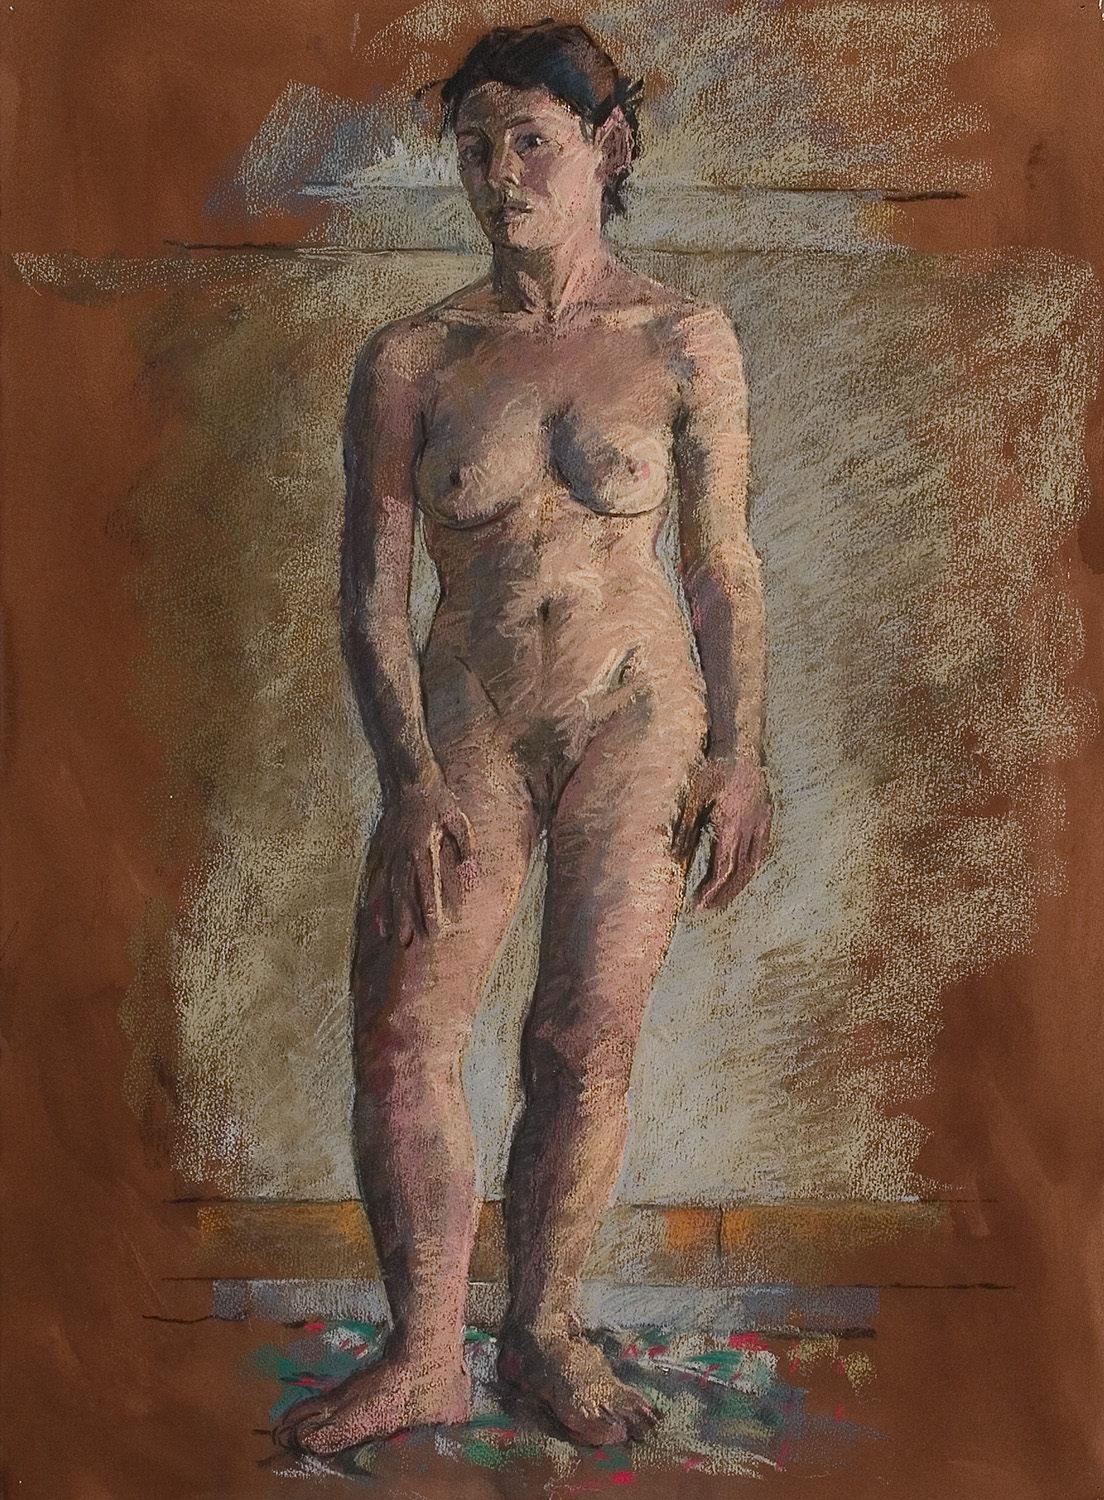 standing figure by Frederick Ortner (larger)